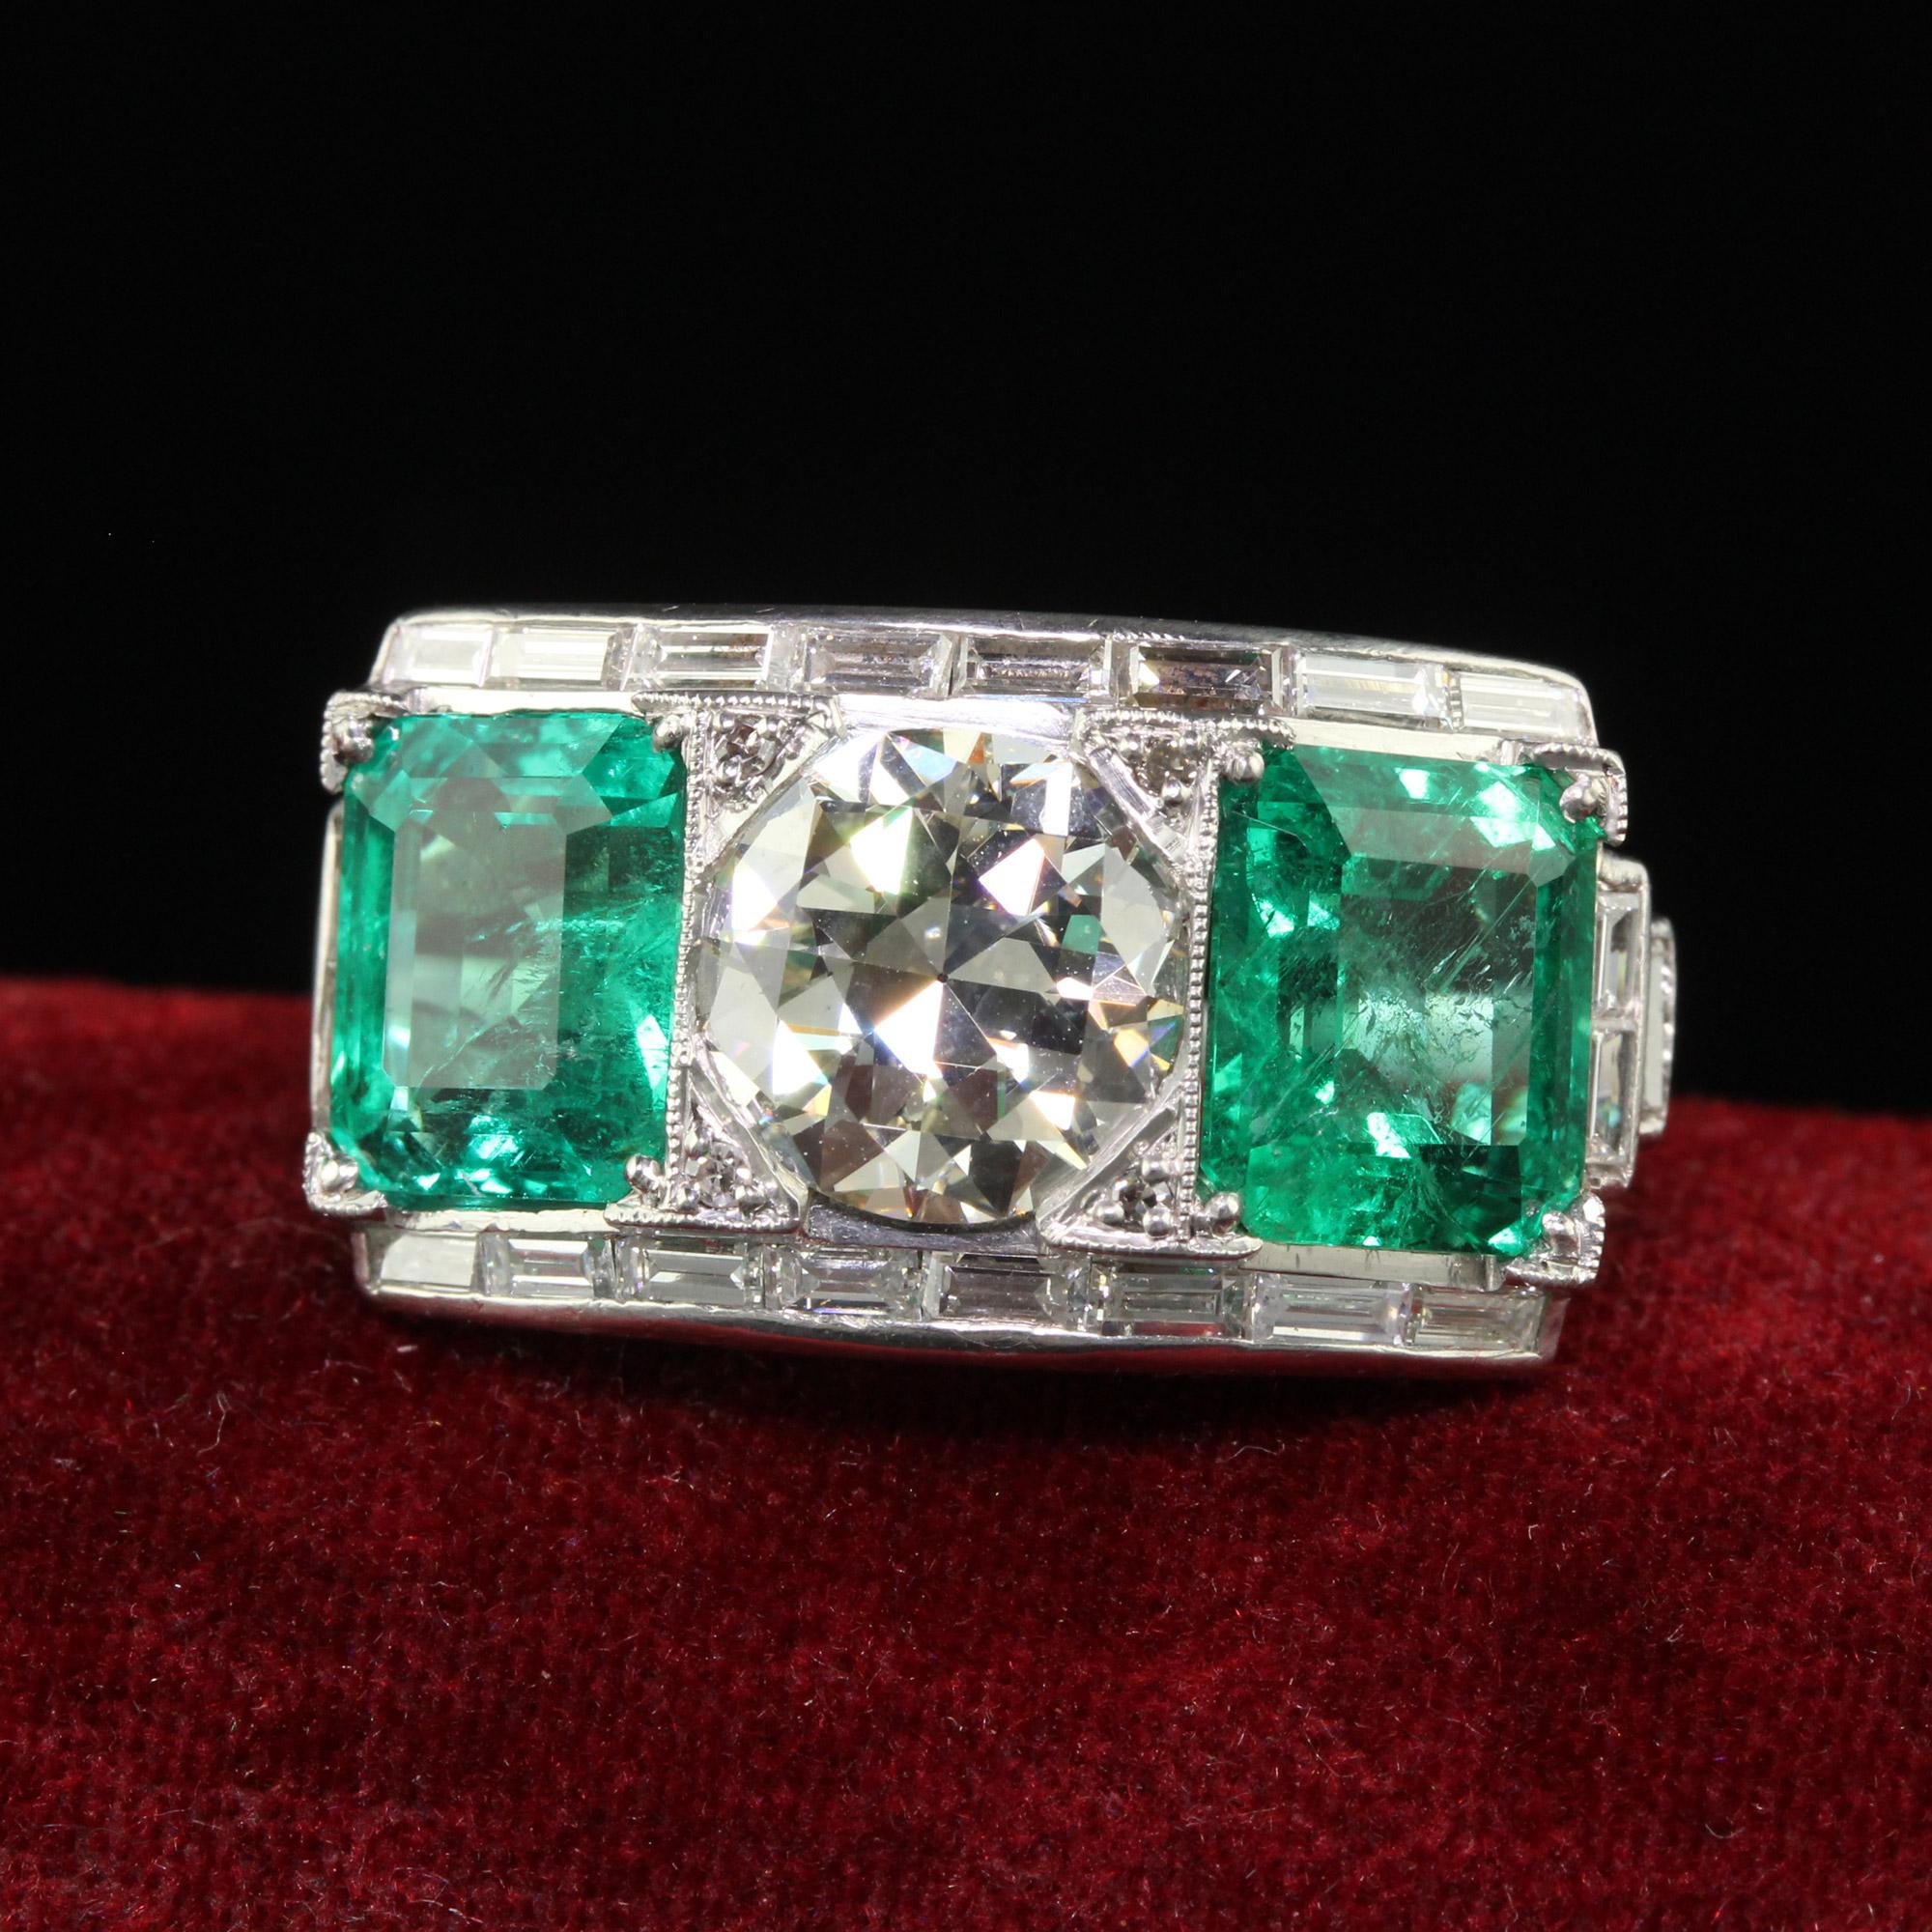 Beautiful Vintage Retro Platinum Old Cut Diamond and Emerald Three Stone Ring - GIA/AGL. This incredible three stone retro ring is crafted in platinum. The top of the ring holds a gorgeous transitional cut diamond that has a GIA report as well as